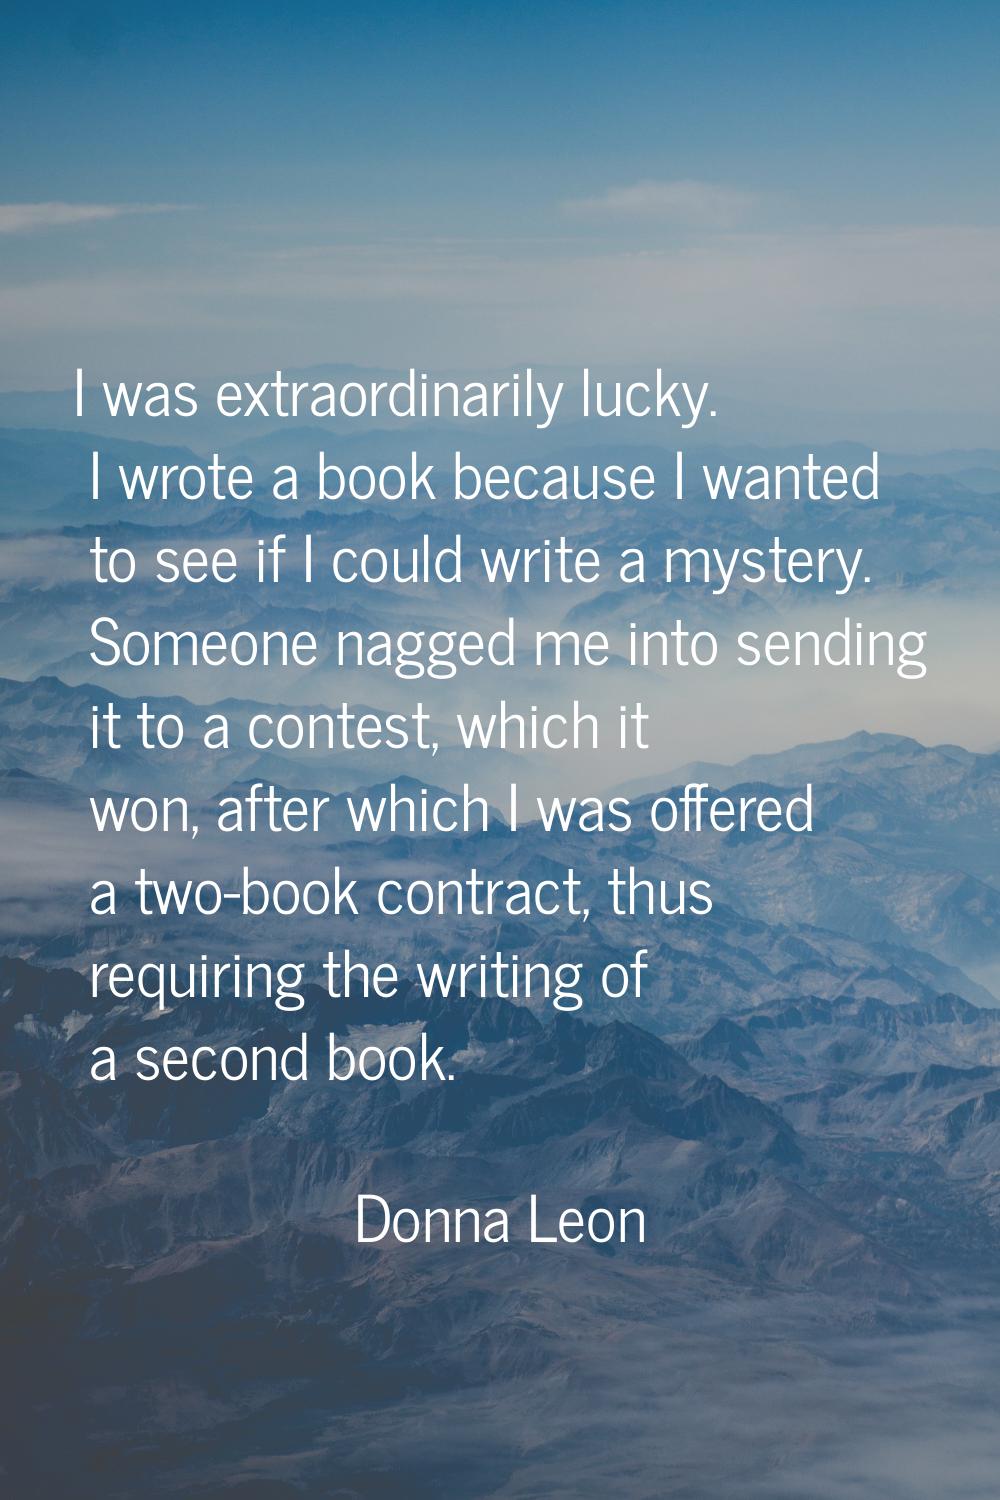 I was extraordinarily lucky. I wrote a book because I wanted to see if I could write a mystery. Som